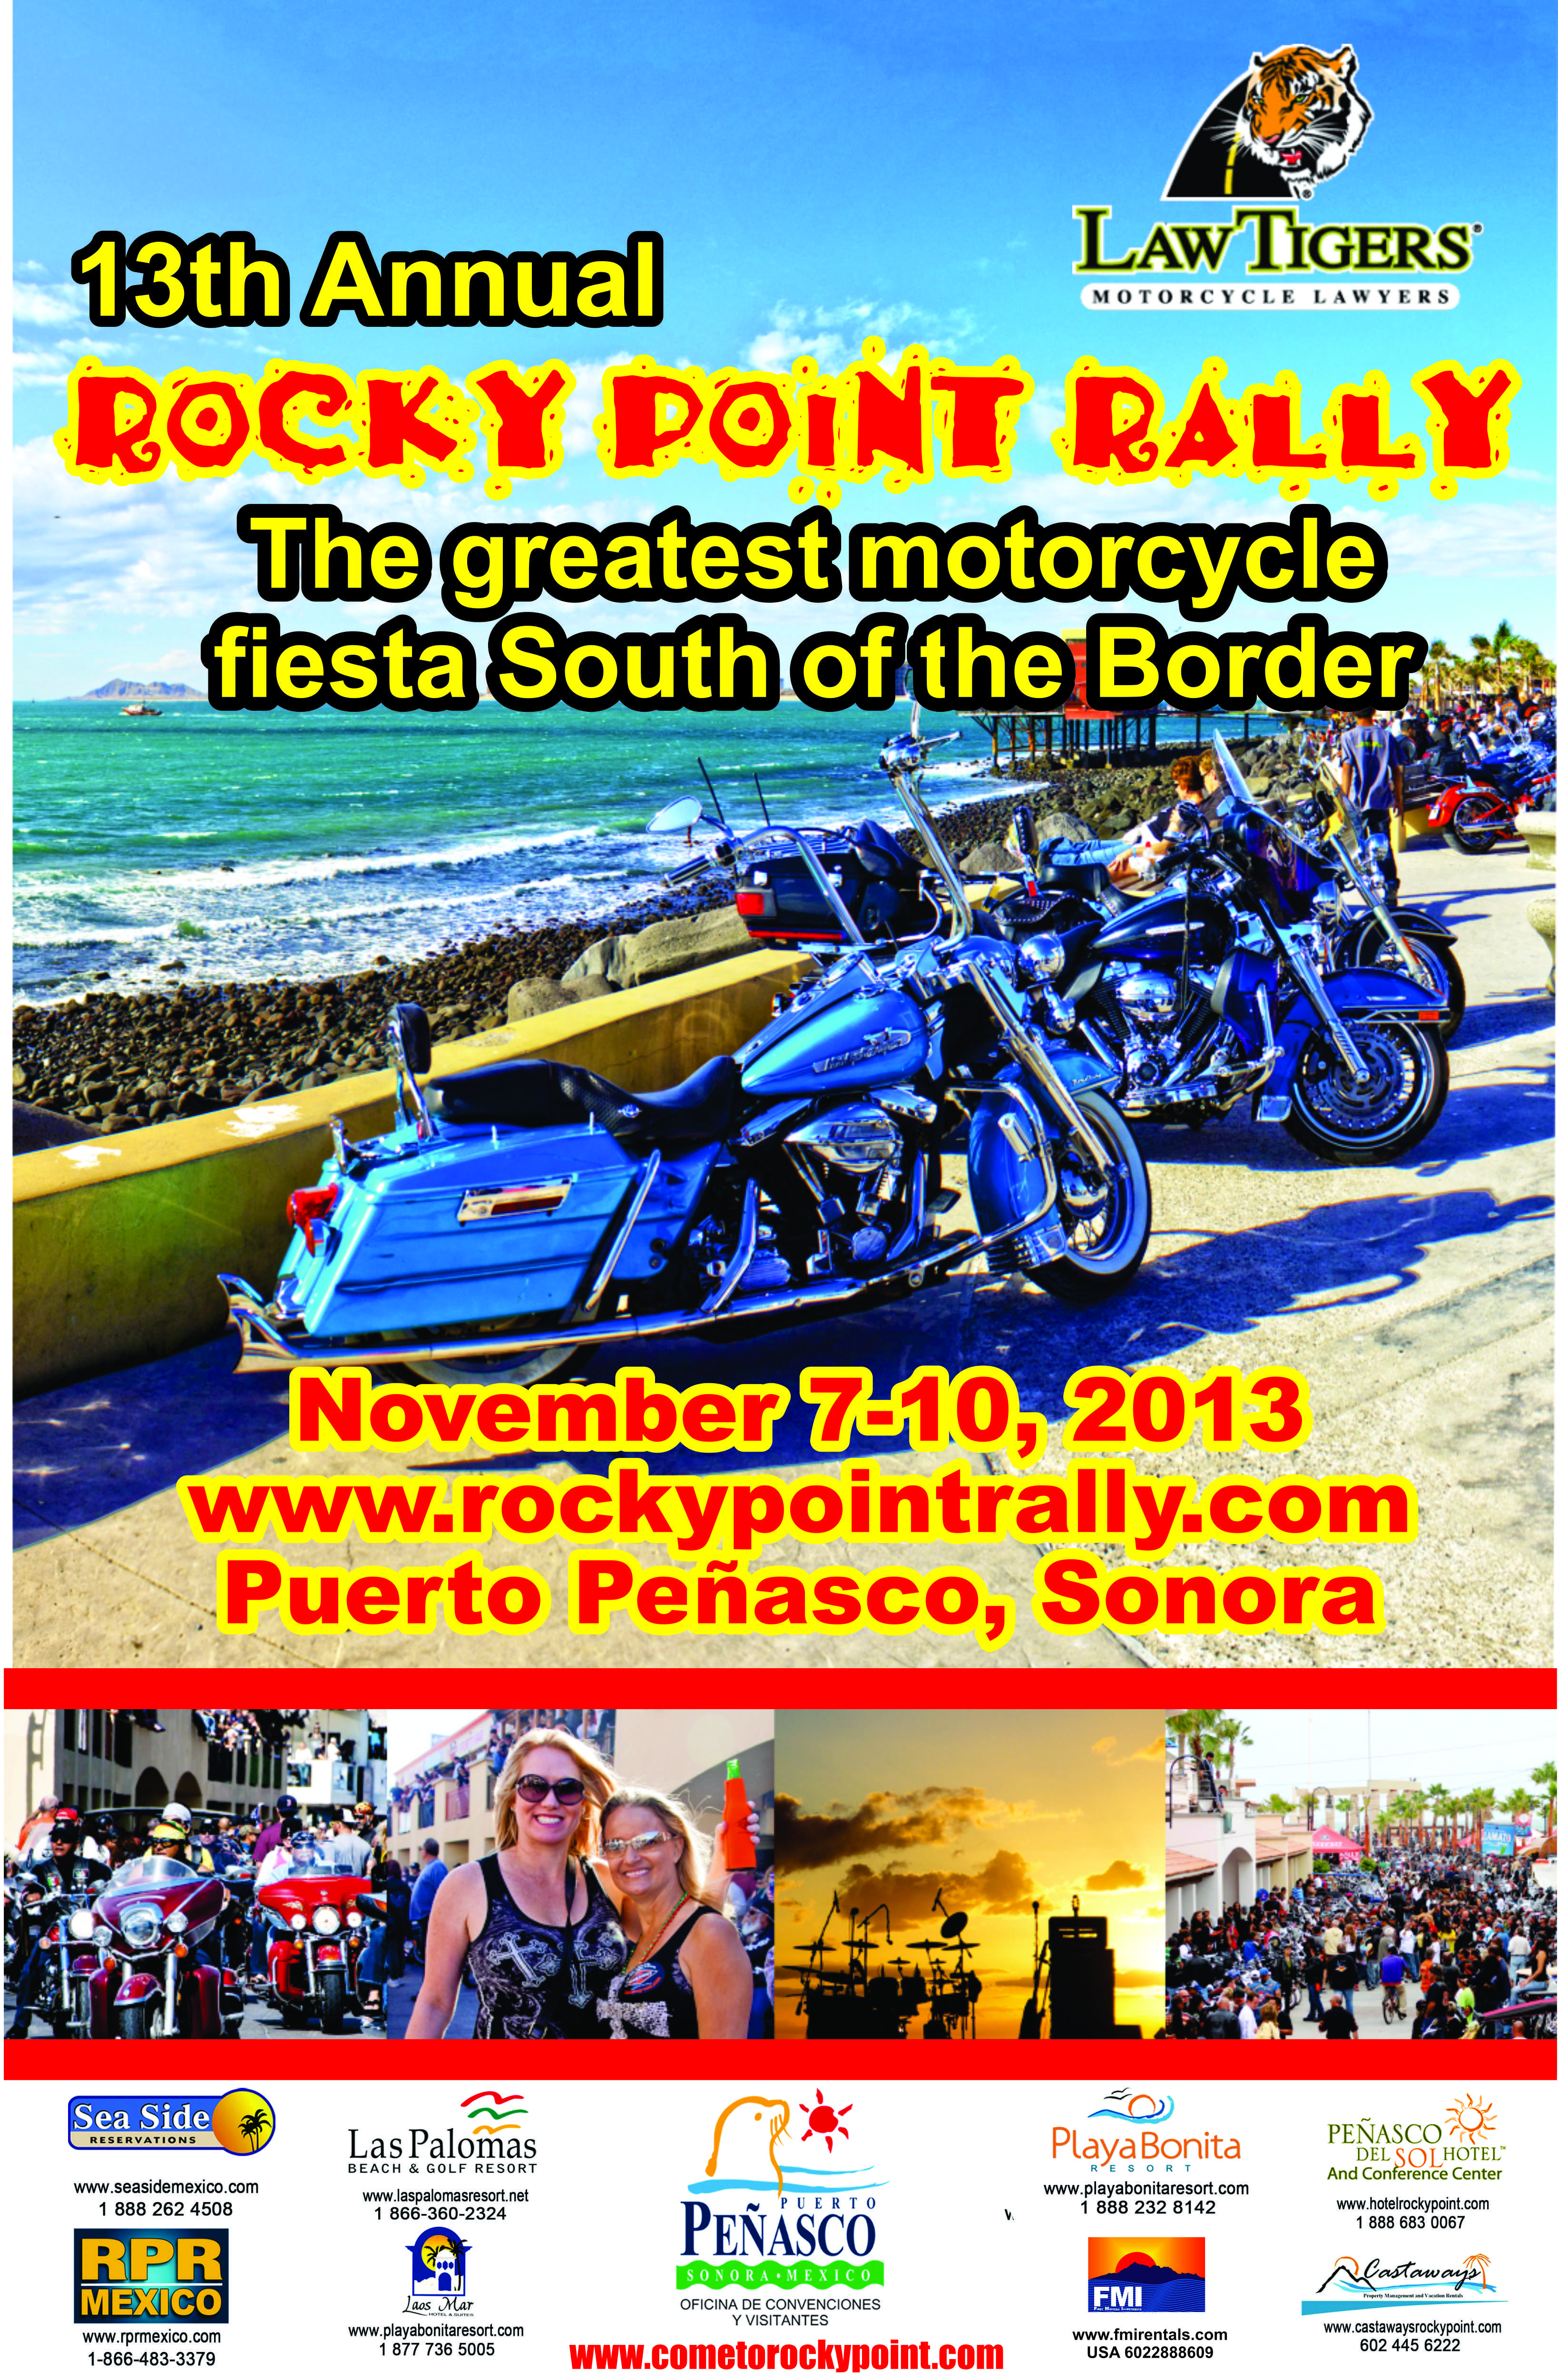 POSTERSOFICIAL 13th Annual Rocky Point Rally!